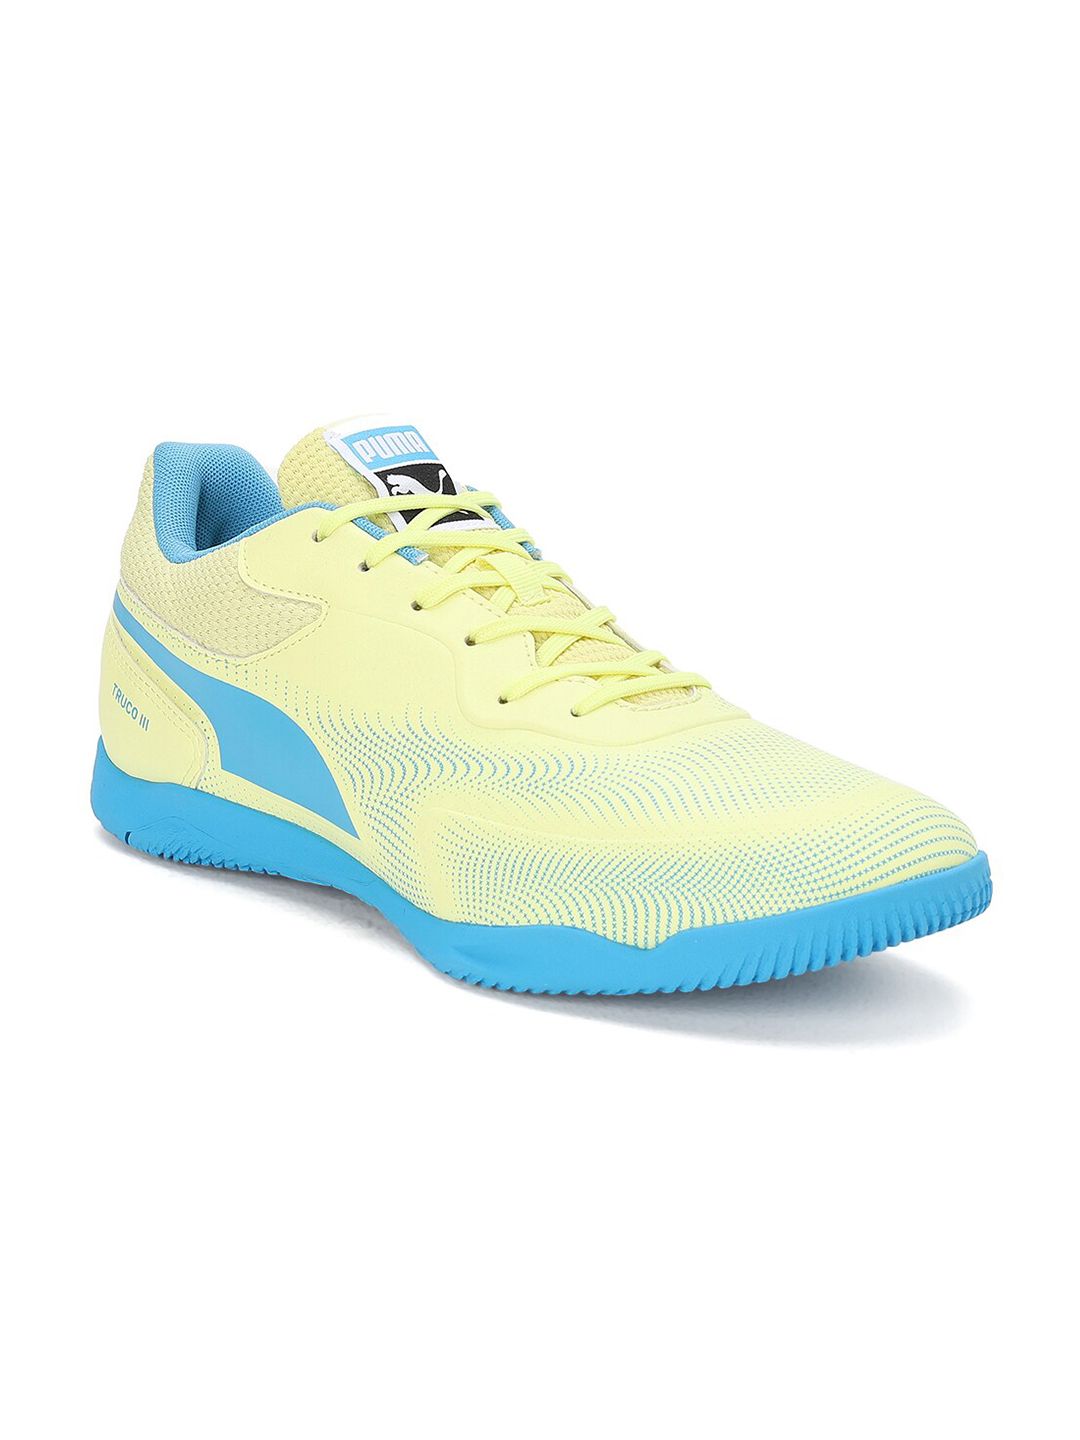 Puma Unisex Yellow Sports Shoes Price in India